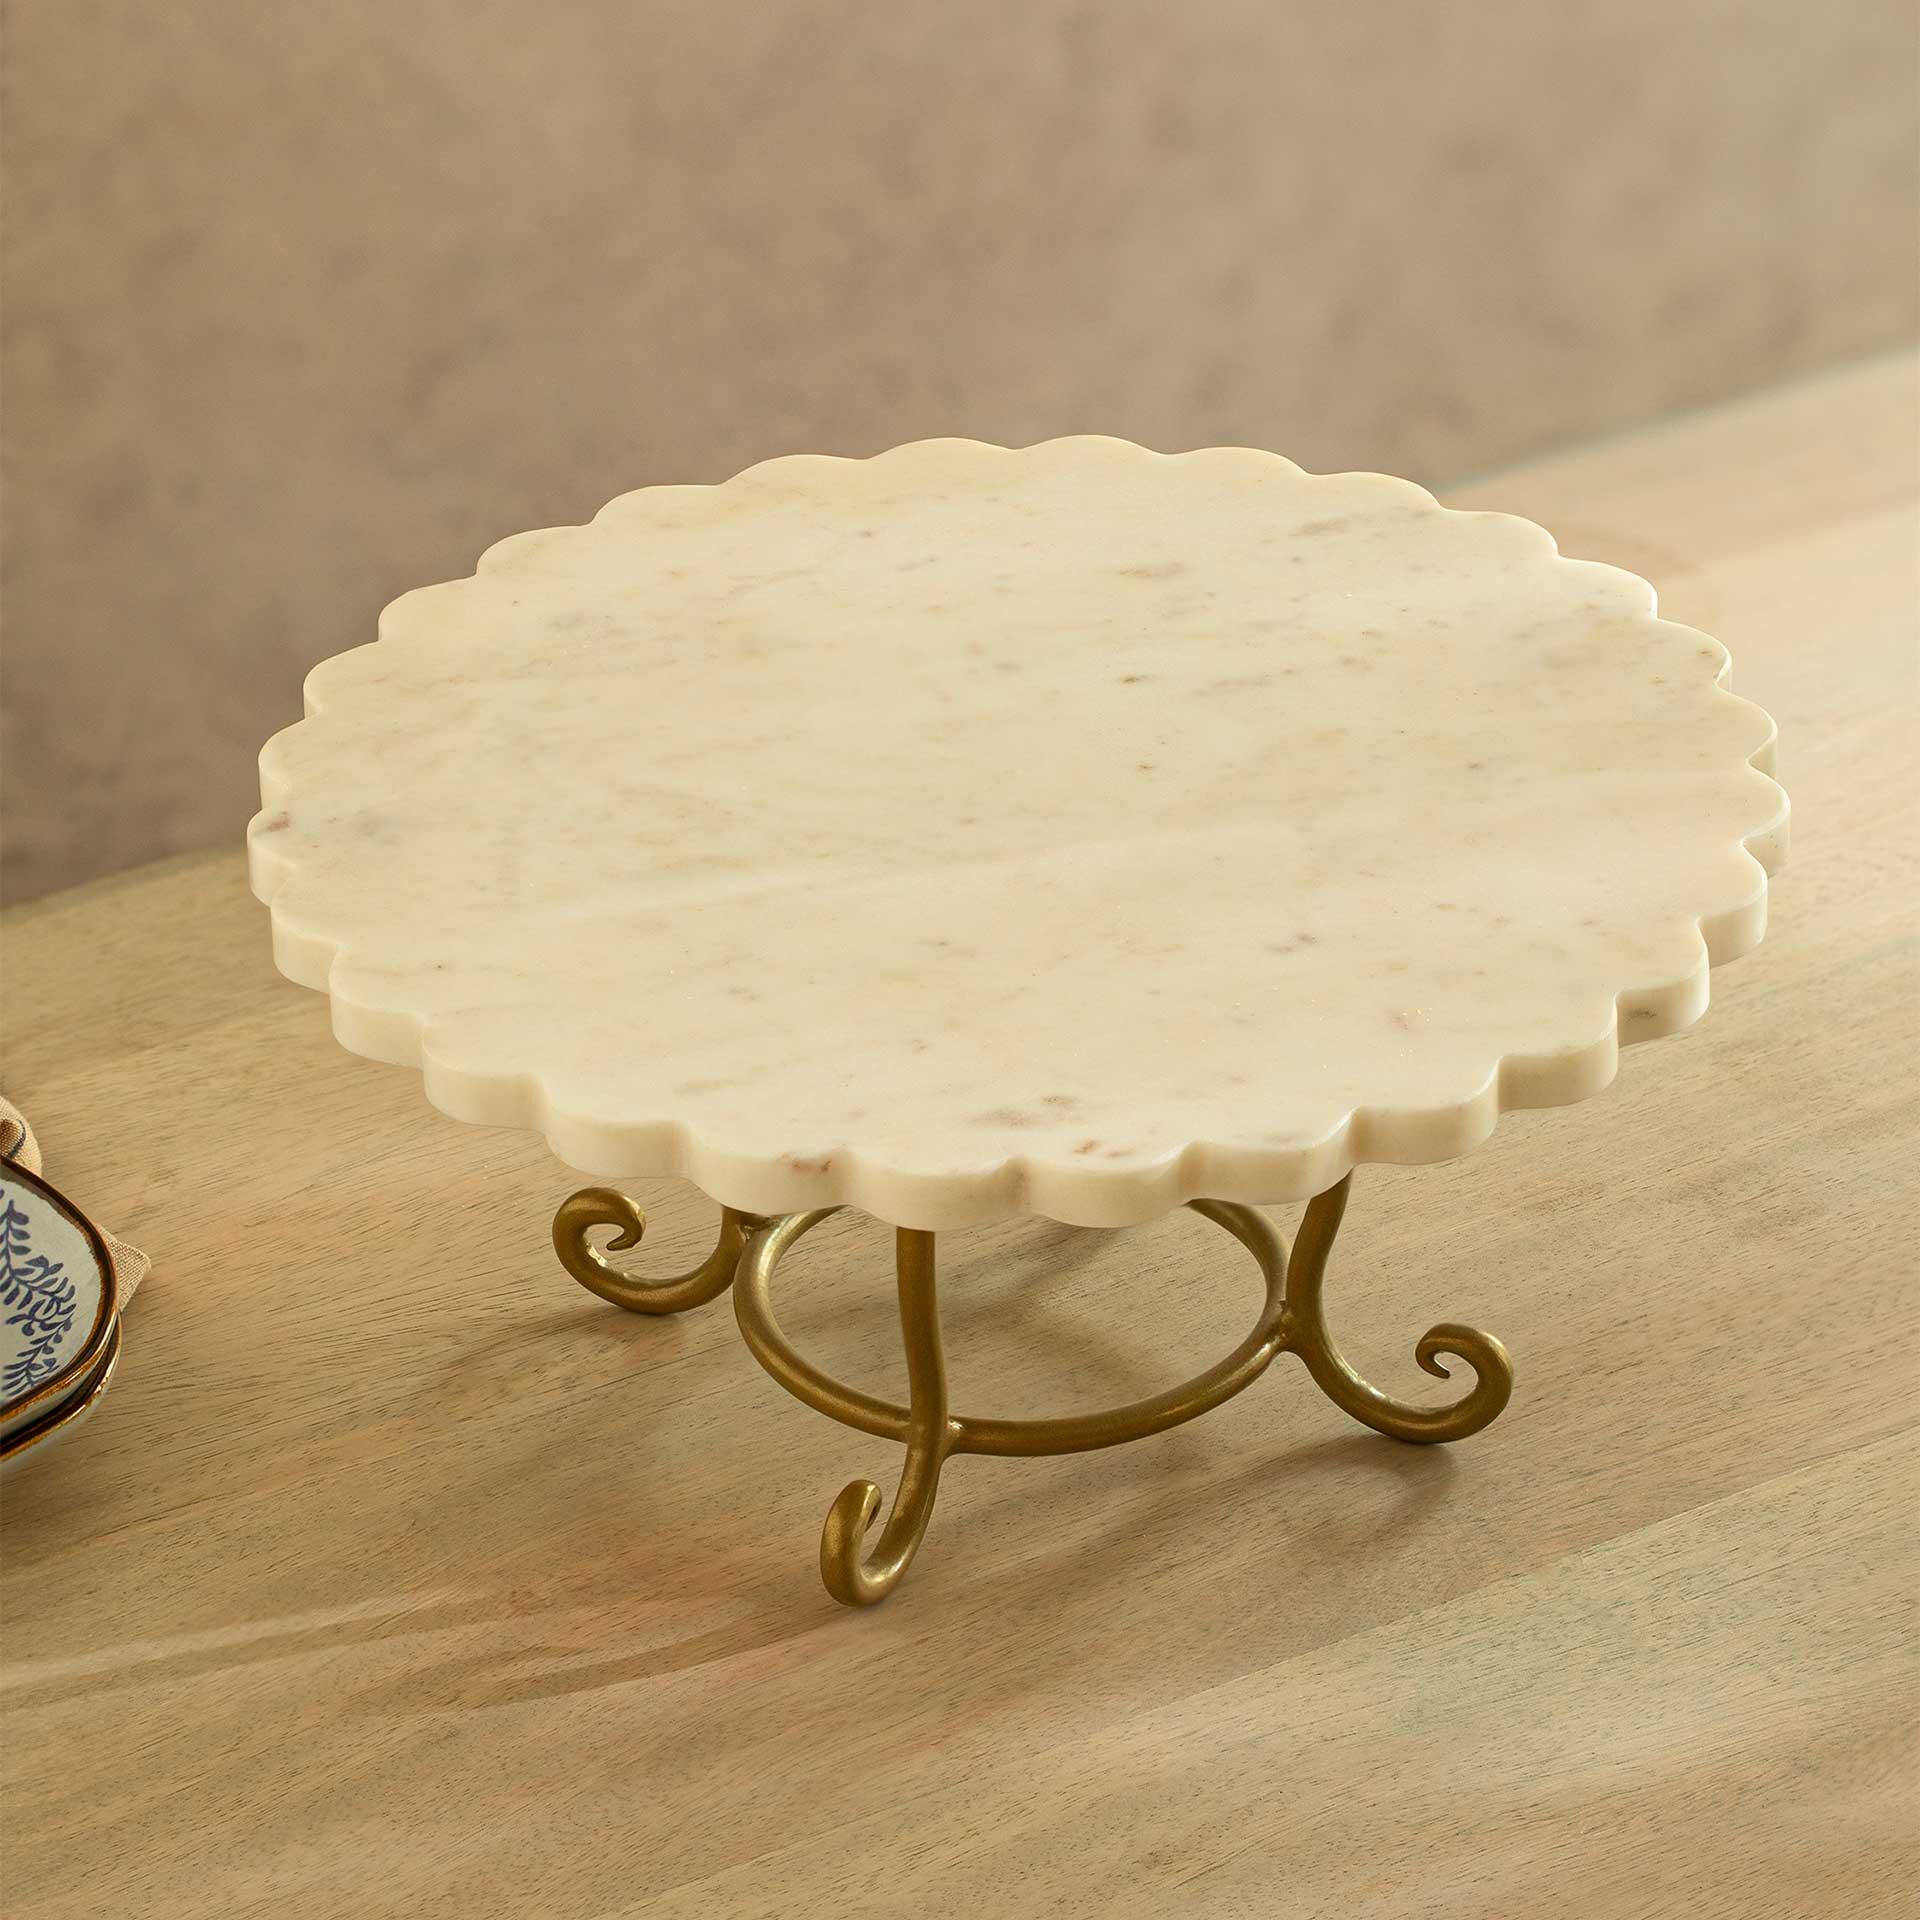 Crescent Cake Stand with Metal Legs